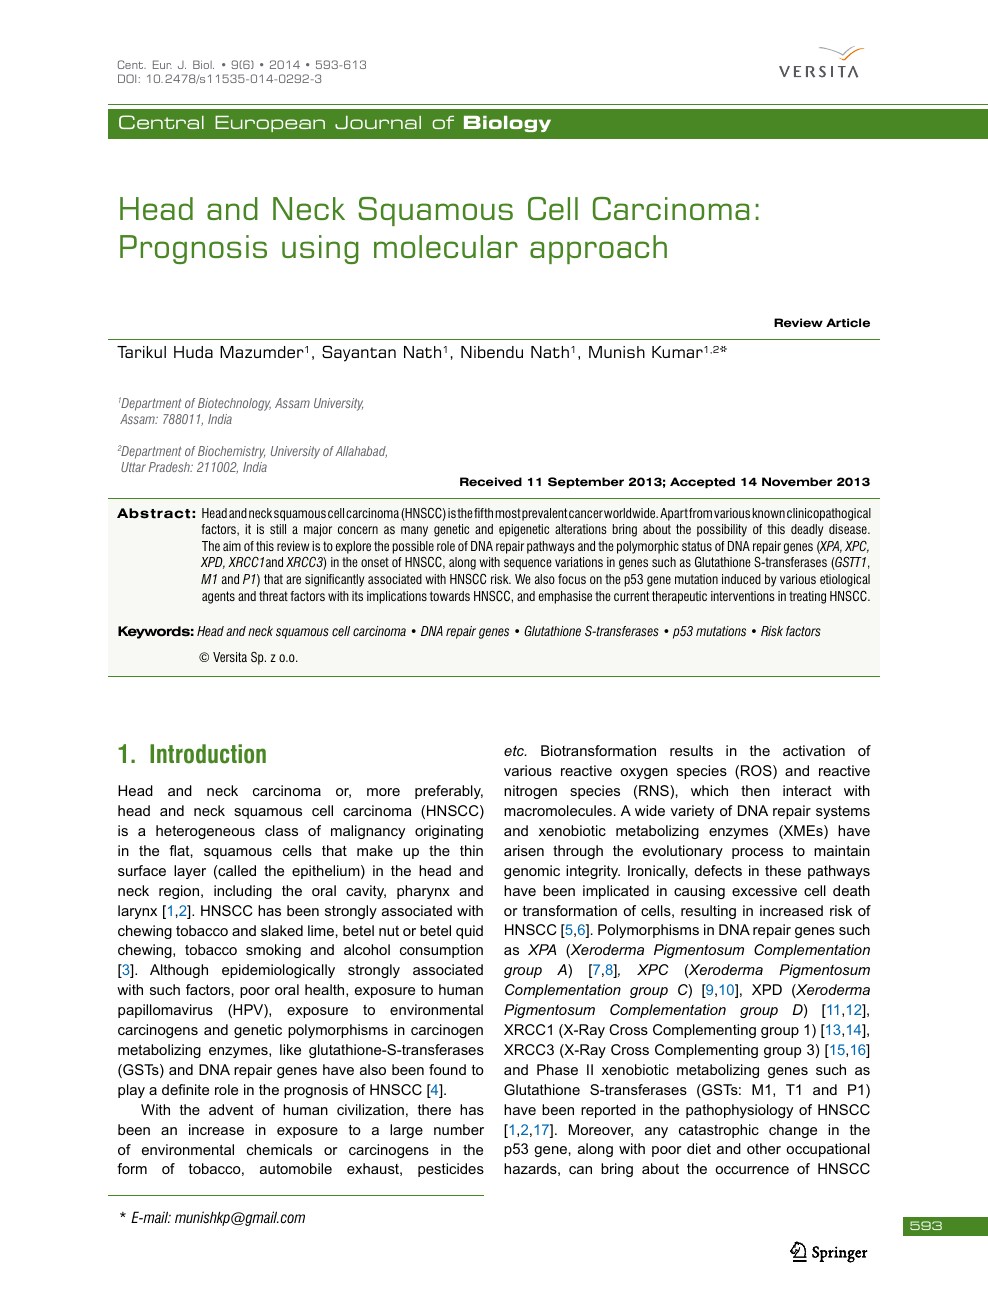 Head and Neck Squamous Cell Carcinoma: Prognosis using molecular 